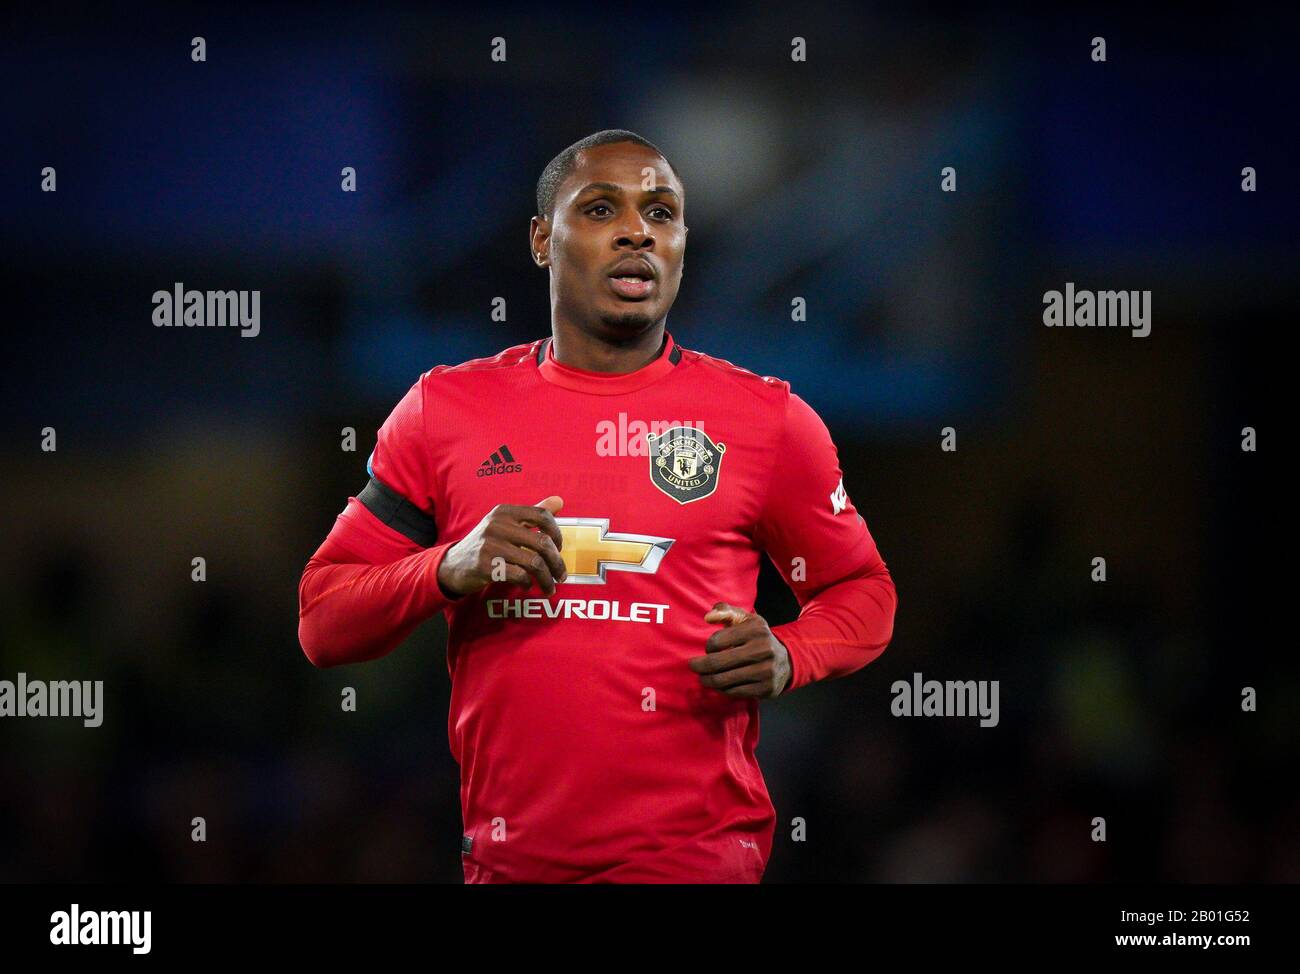 Odion Ighalo (on loan from Shanghai Shenhua) of Man Utd makes his debut during the Premier League match between Chelsea and Manchester United at Stamford Bridge, London, England on 17 February 2020. Photo by Andy Rowland. Stock Photo